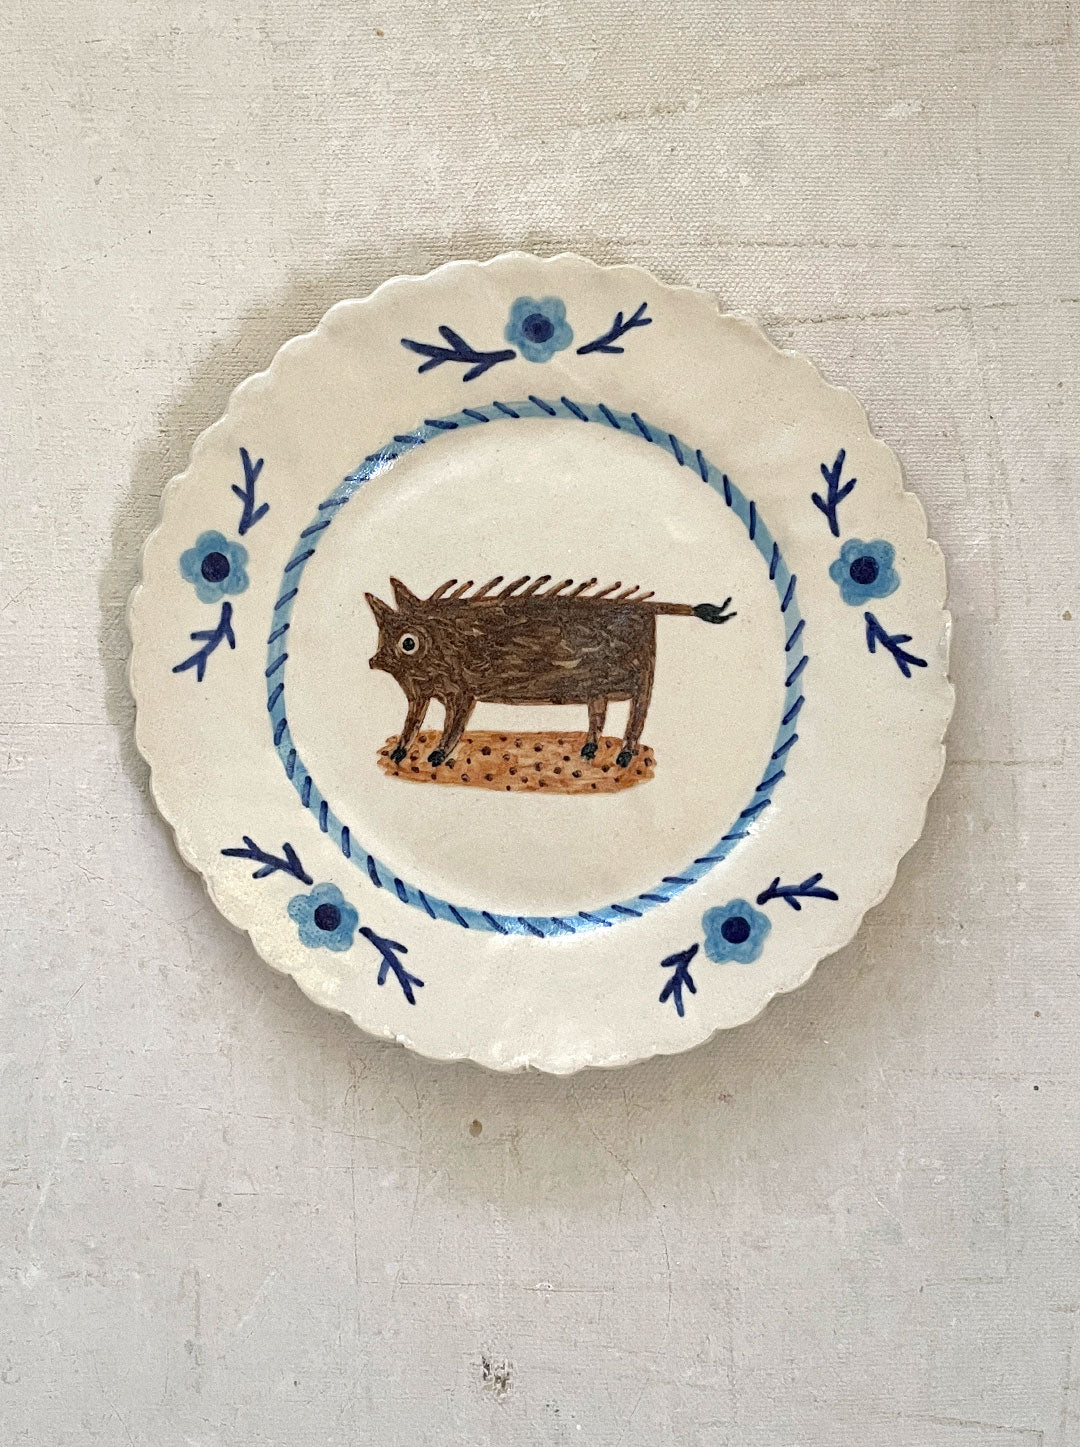 WILD PIG PARTY PLATE NO. 1